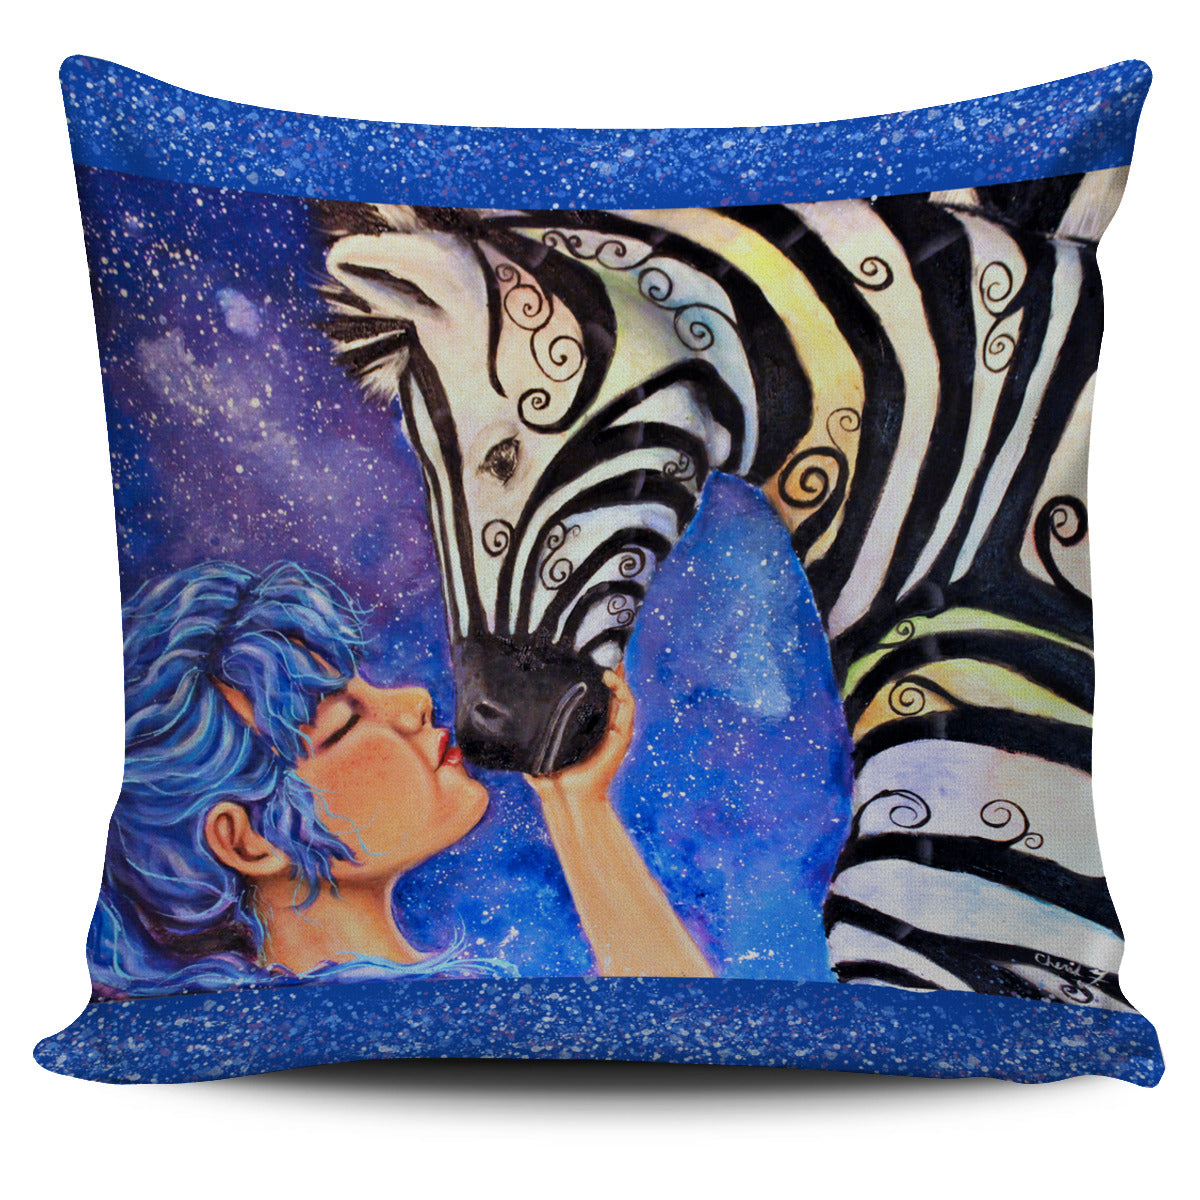 A Kiss To Make It Better Throw Pillow Cover 18x18in